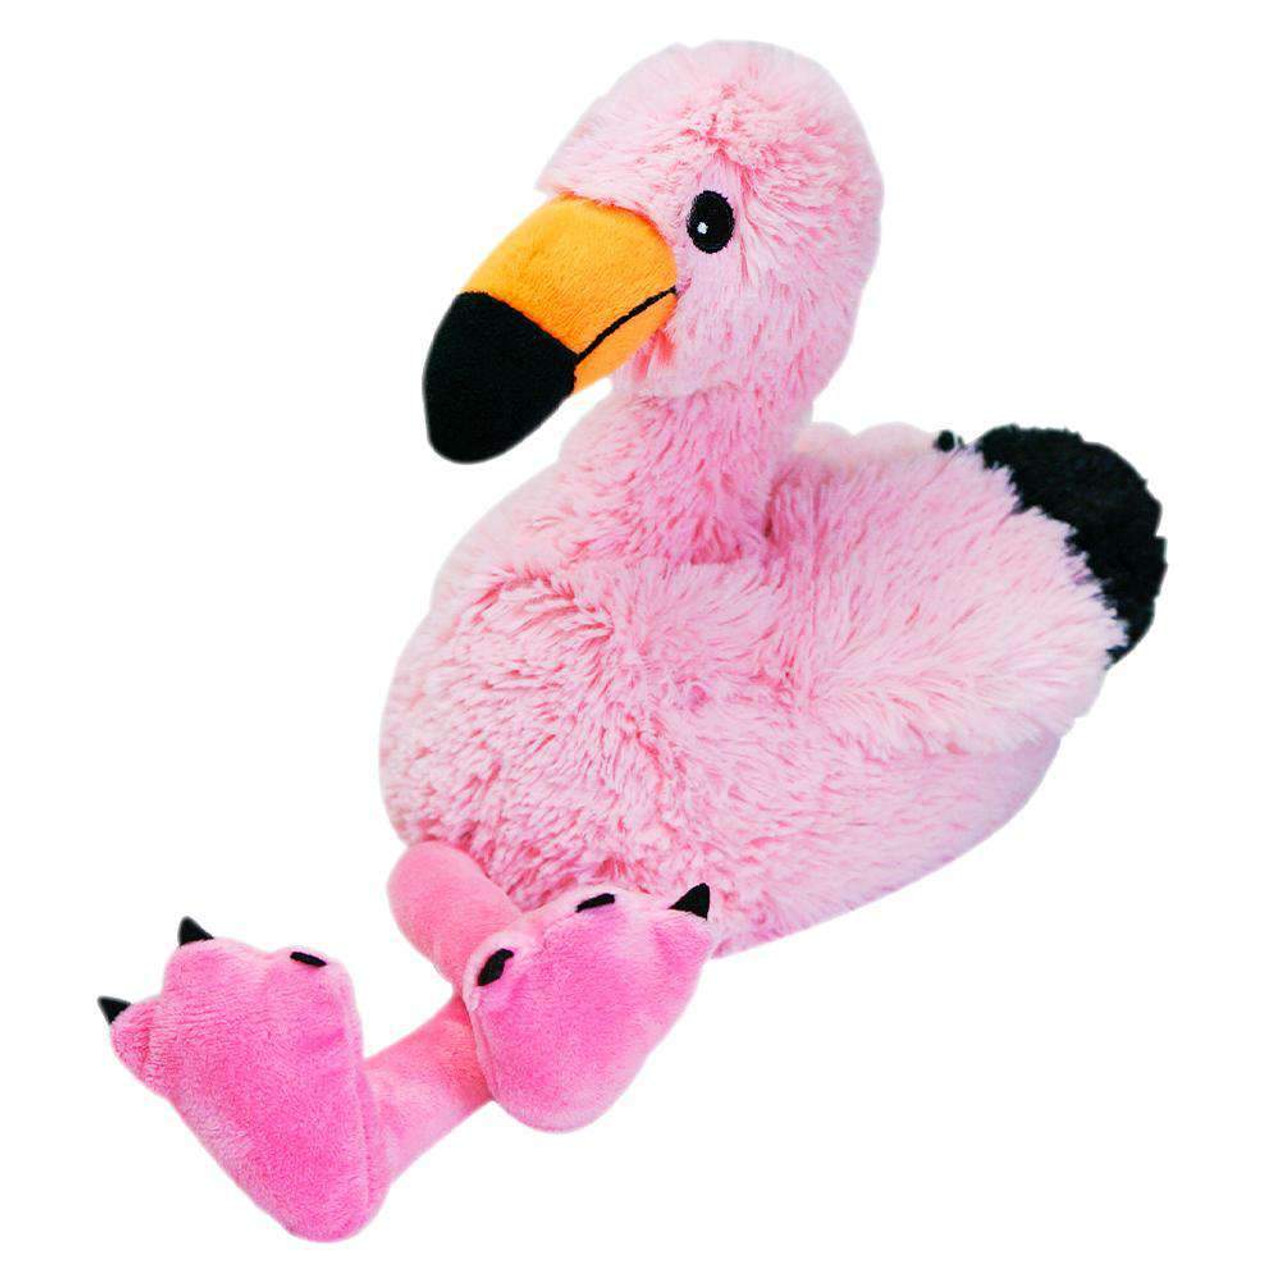 Large 13” Plush Flamingo Warmies® With Real Lavender 